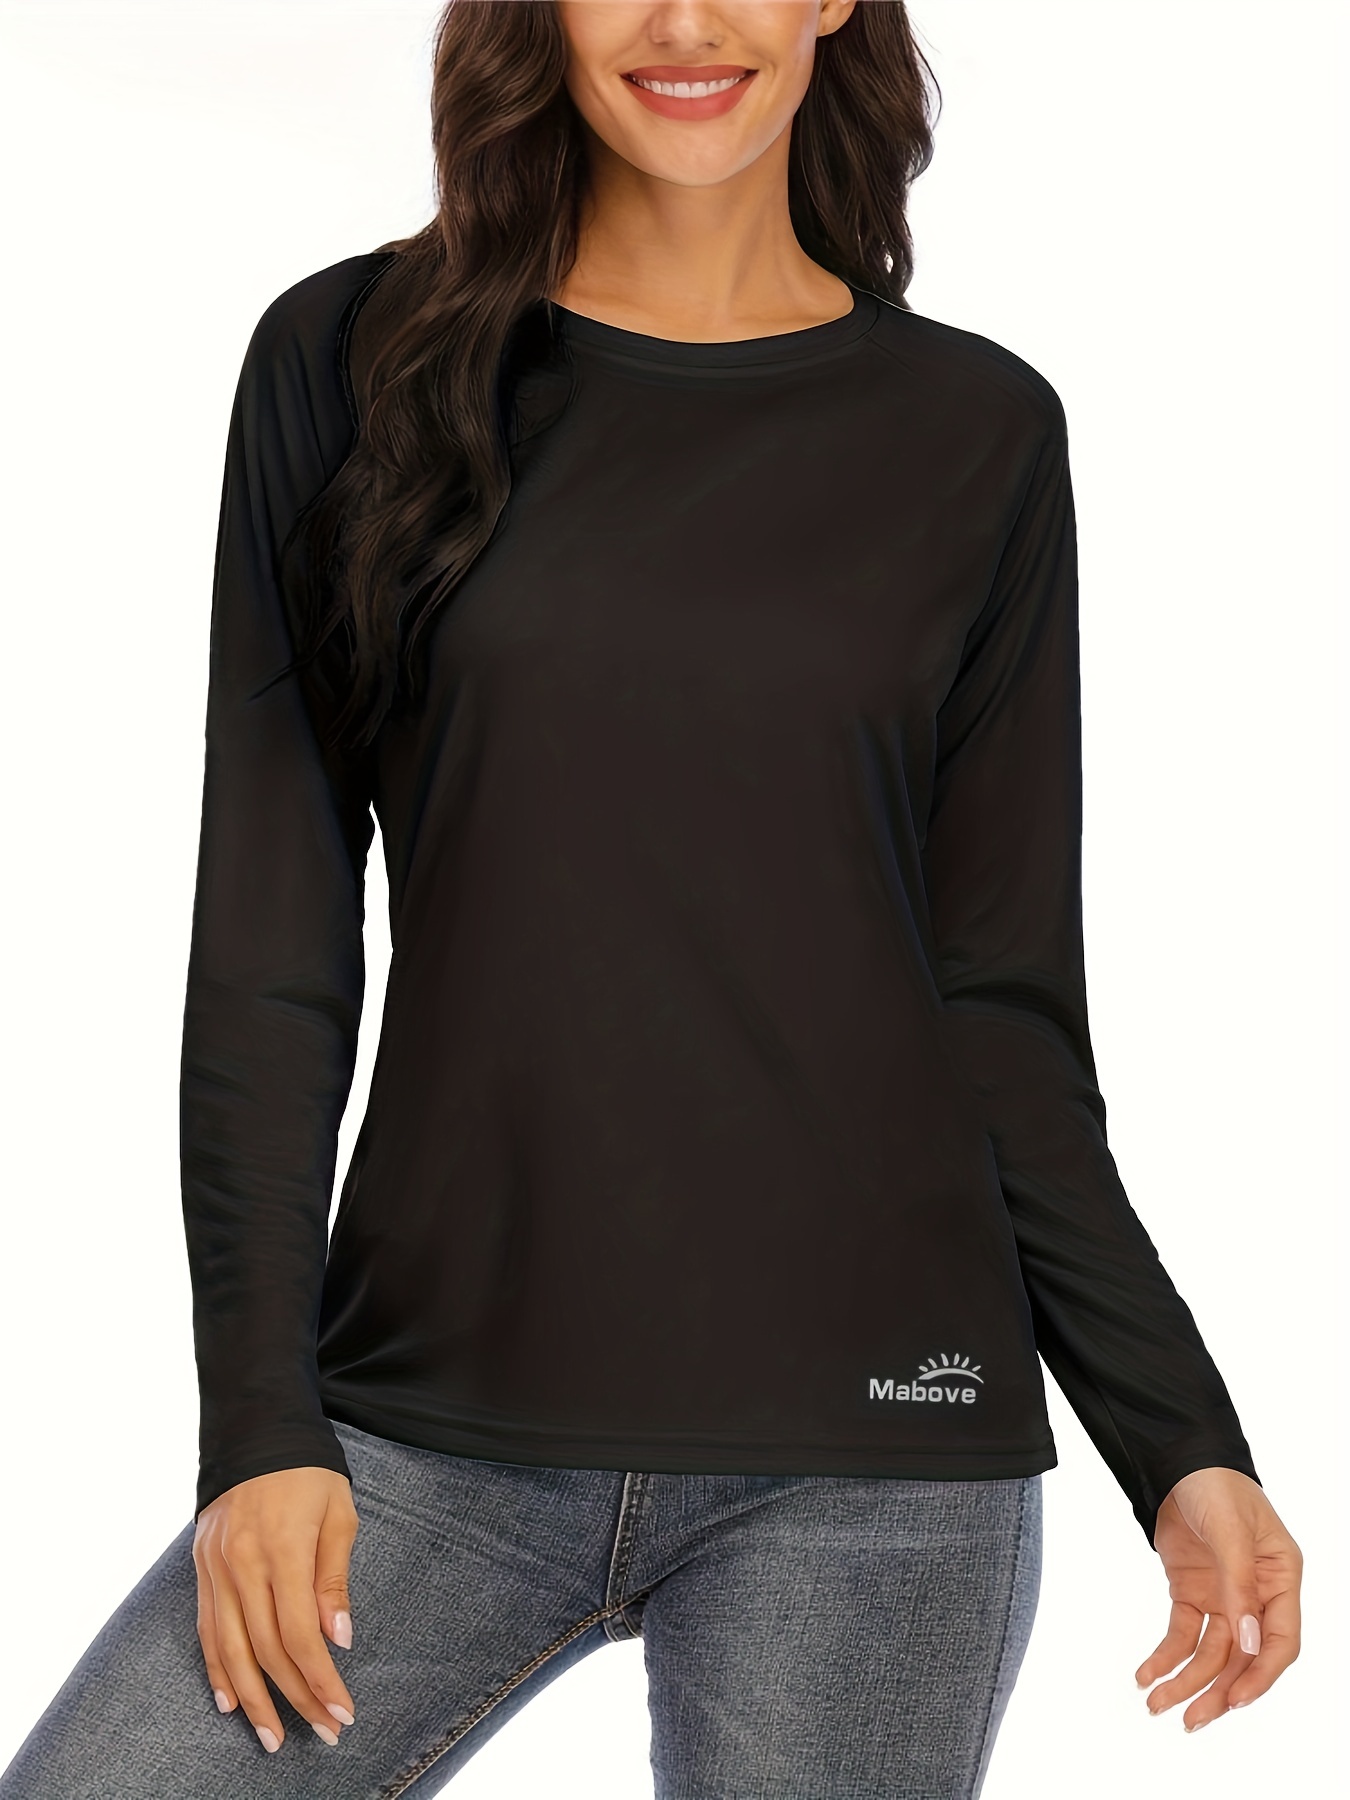 Women's UV Sun Protection Shirt - Fast Dry, UPF 50+, Crew Neck, Perfect for  Outdoor Sports, Hiking, Fishing, and Swimming